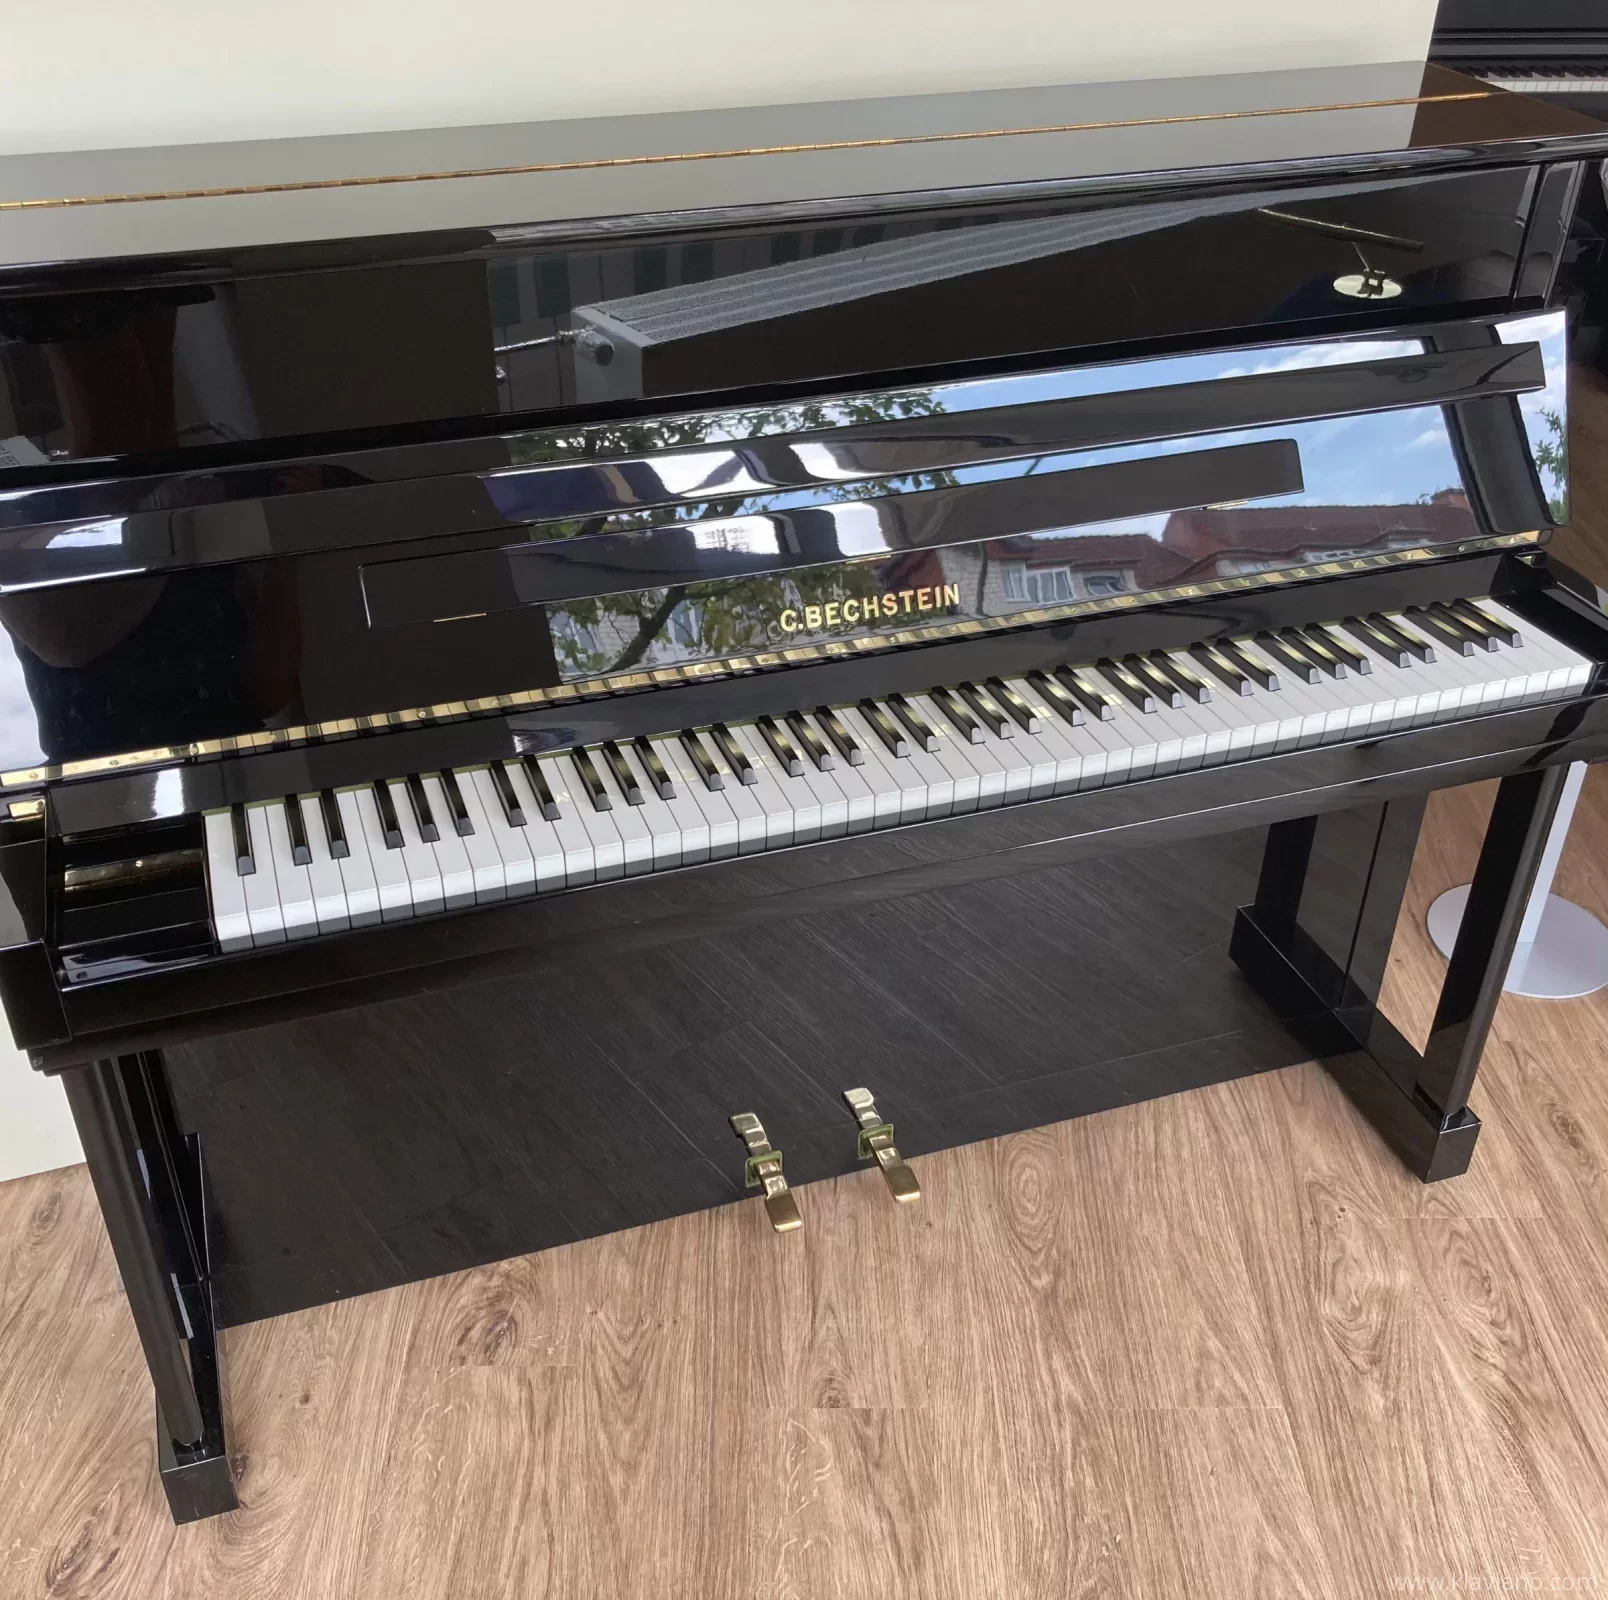 Used, Bechstein, Other